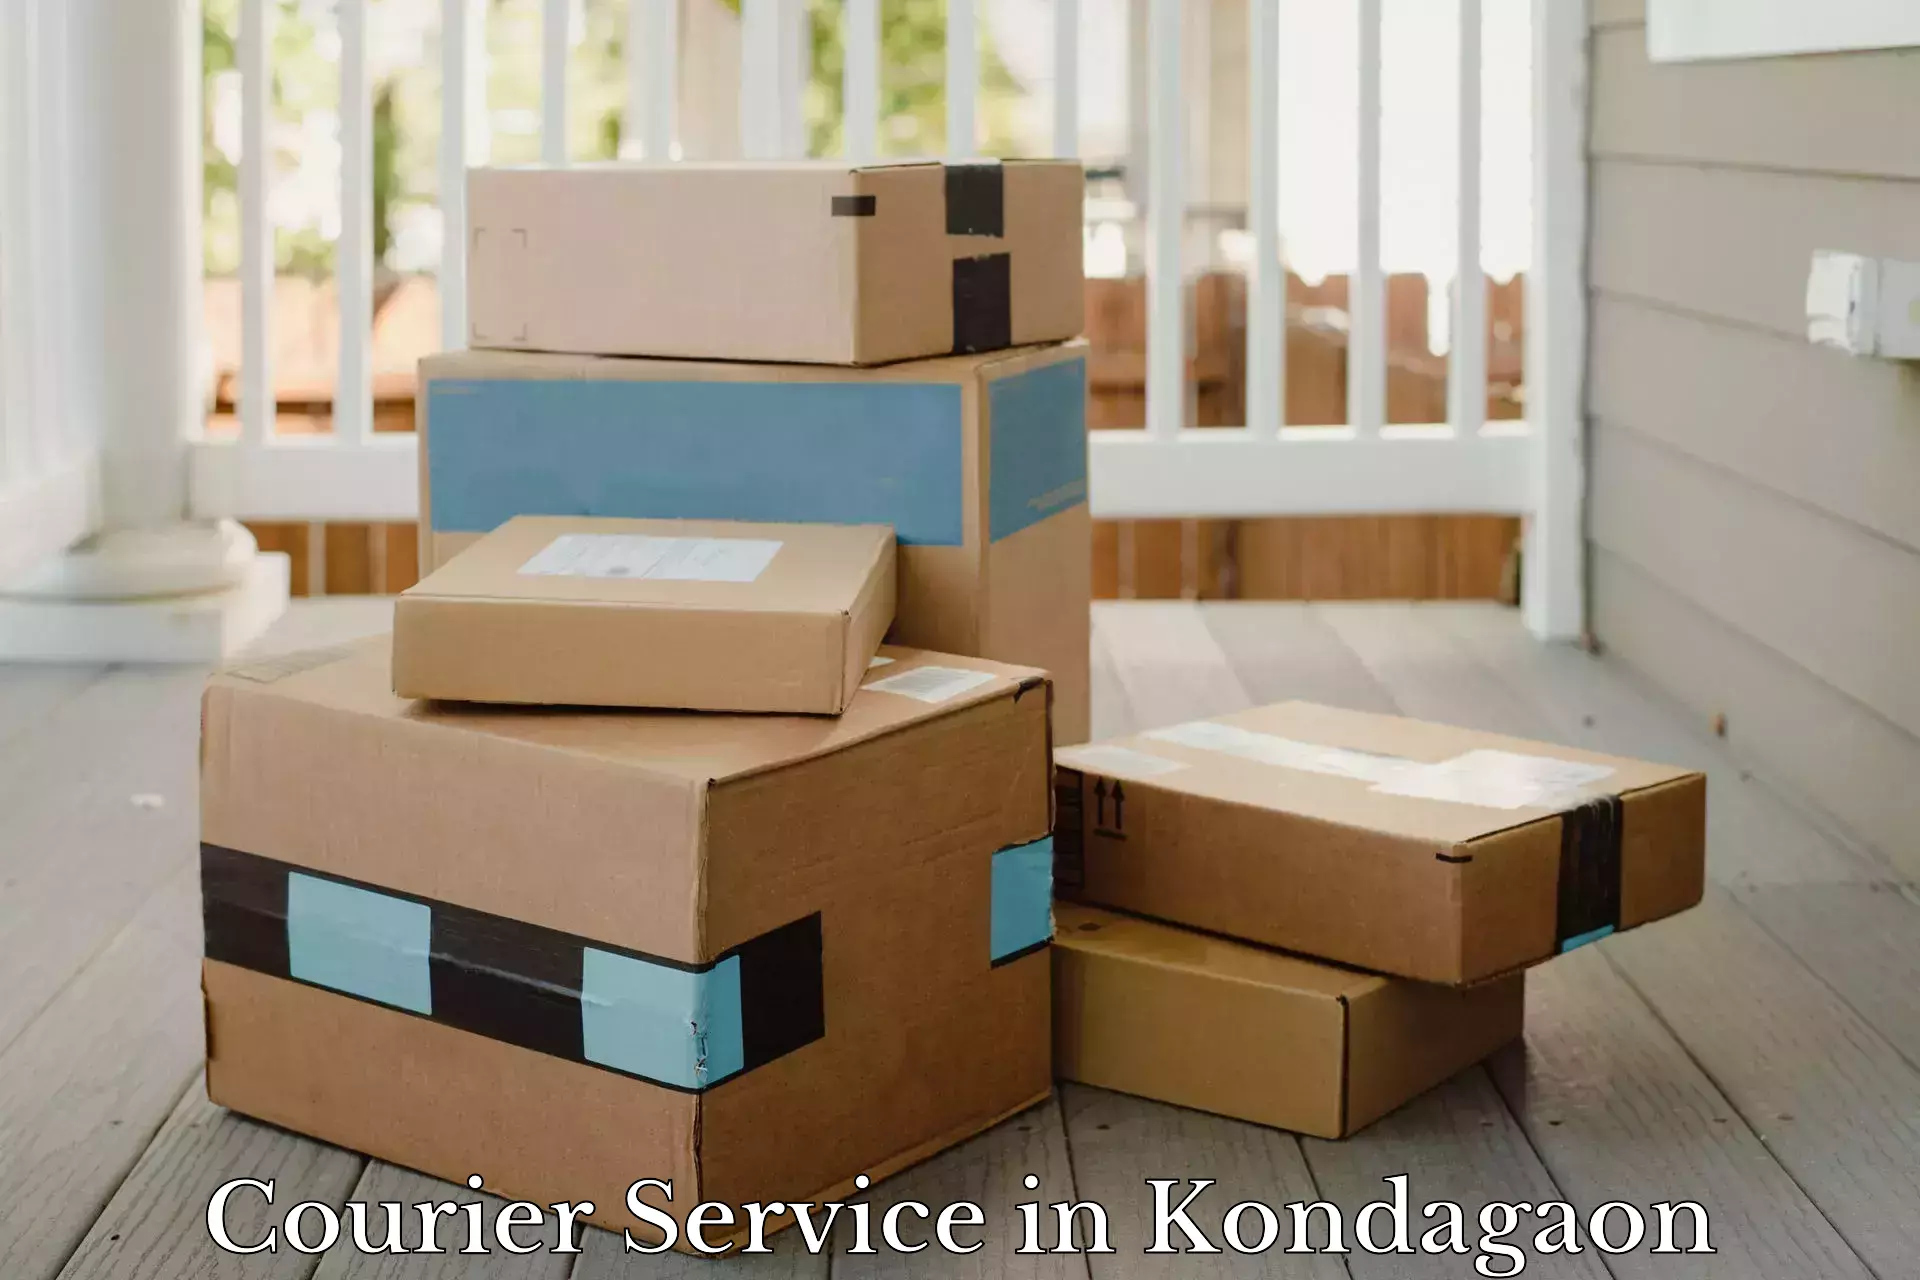 Courier service efficiency in Kondagaon